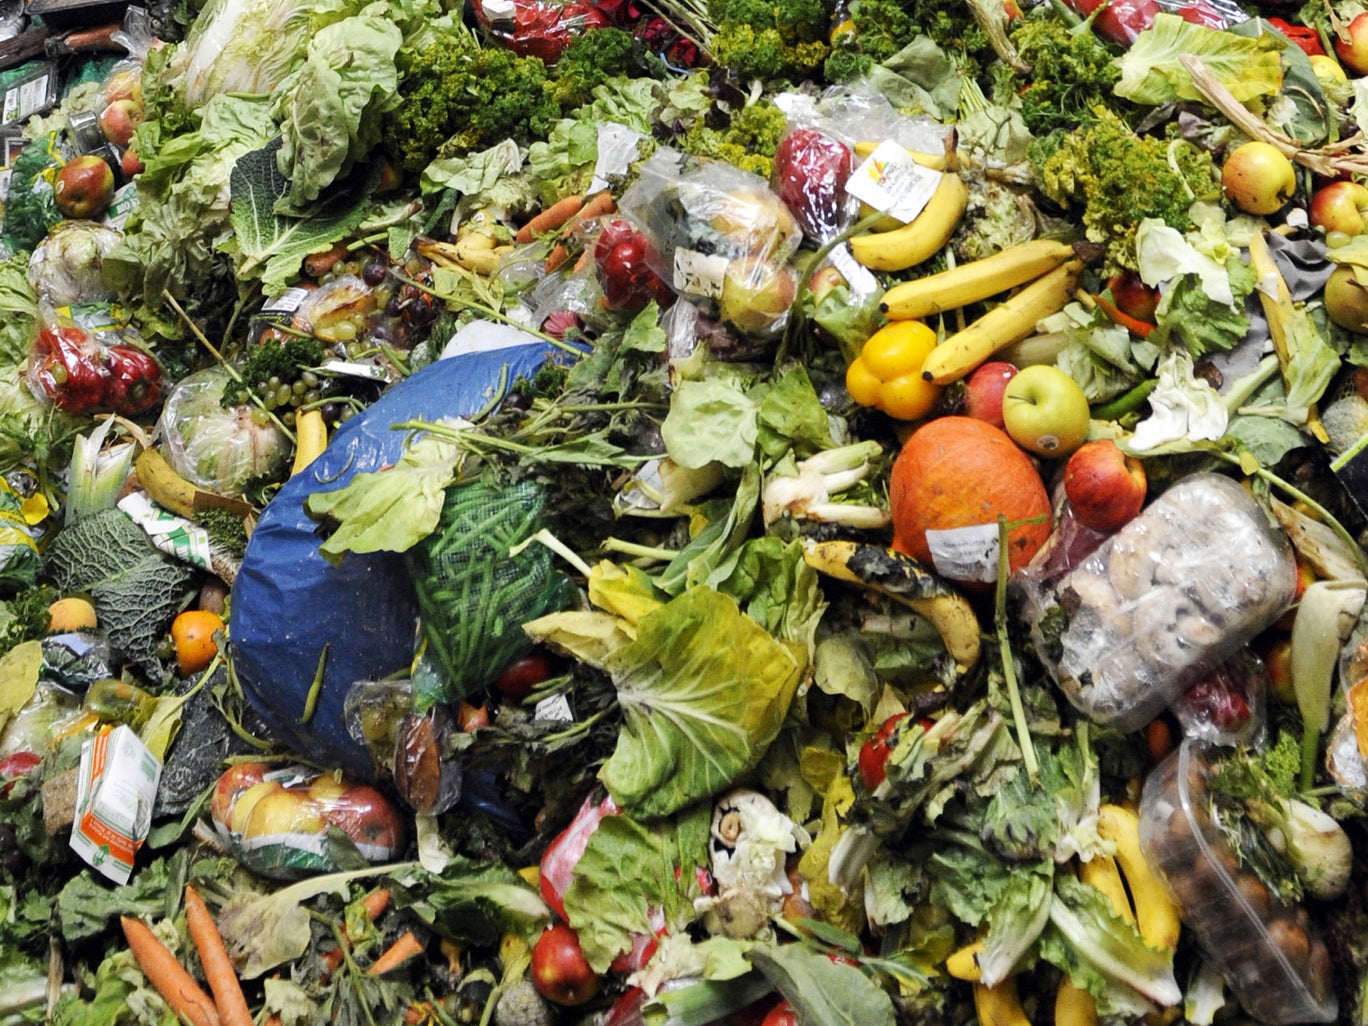 The decomposition of solid waste in landfills results in the release of methane, a greenhouse gas 21 times more potent than carbon dioxide. Credit: Getty Images/Guardian